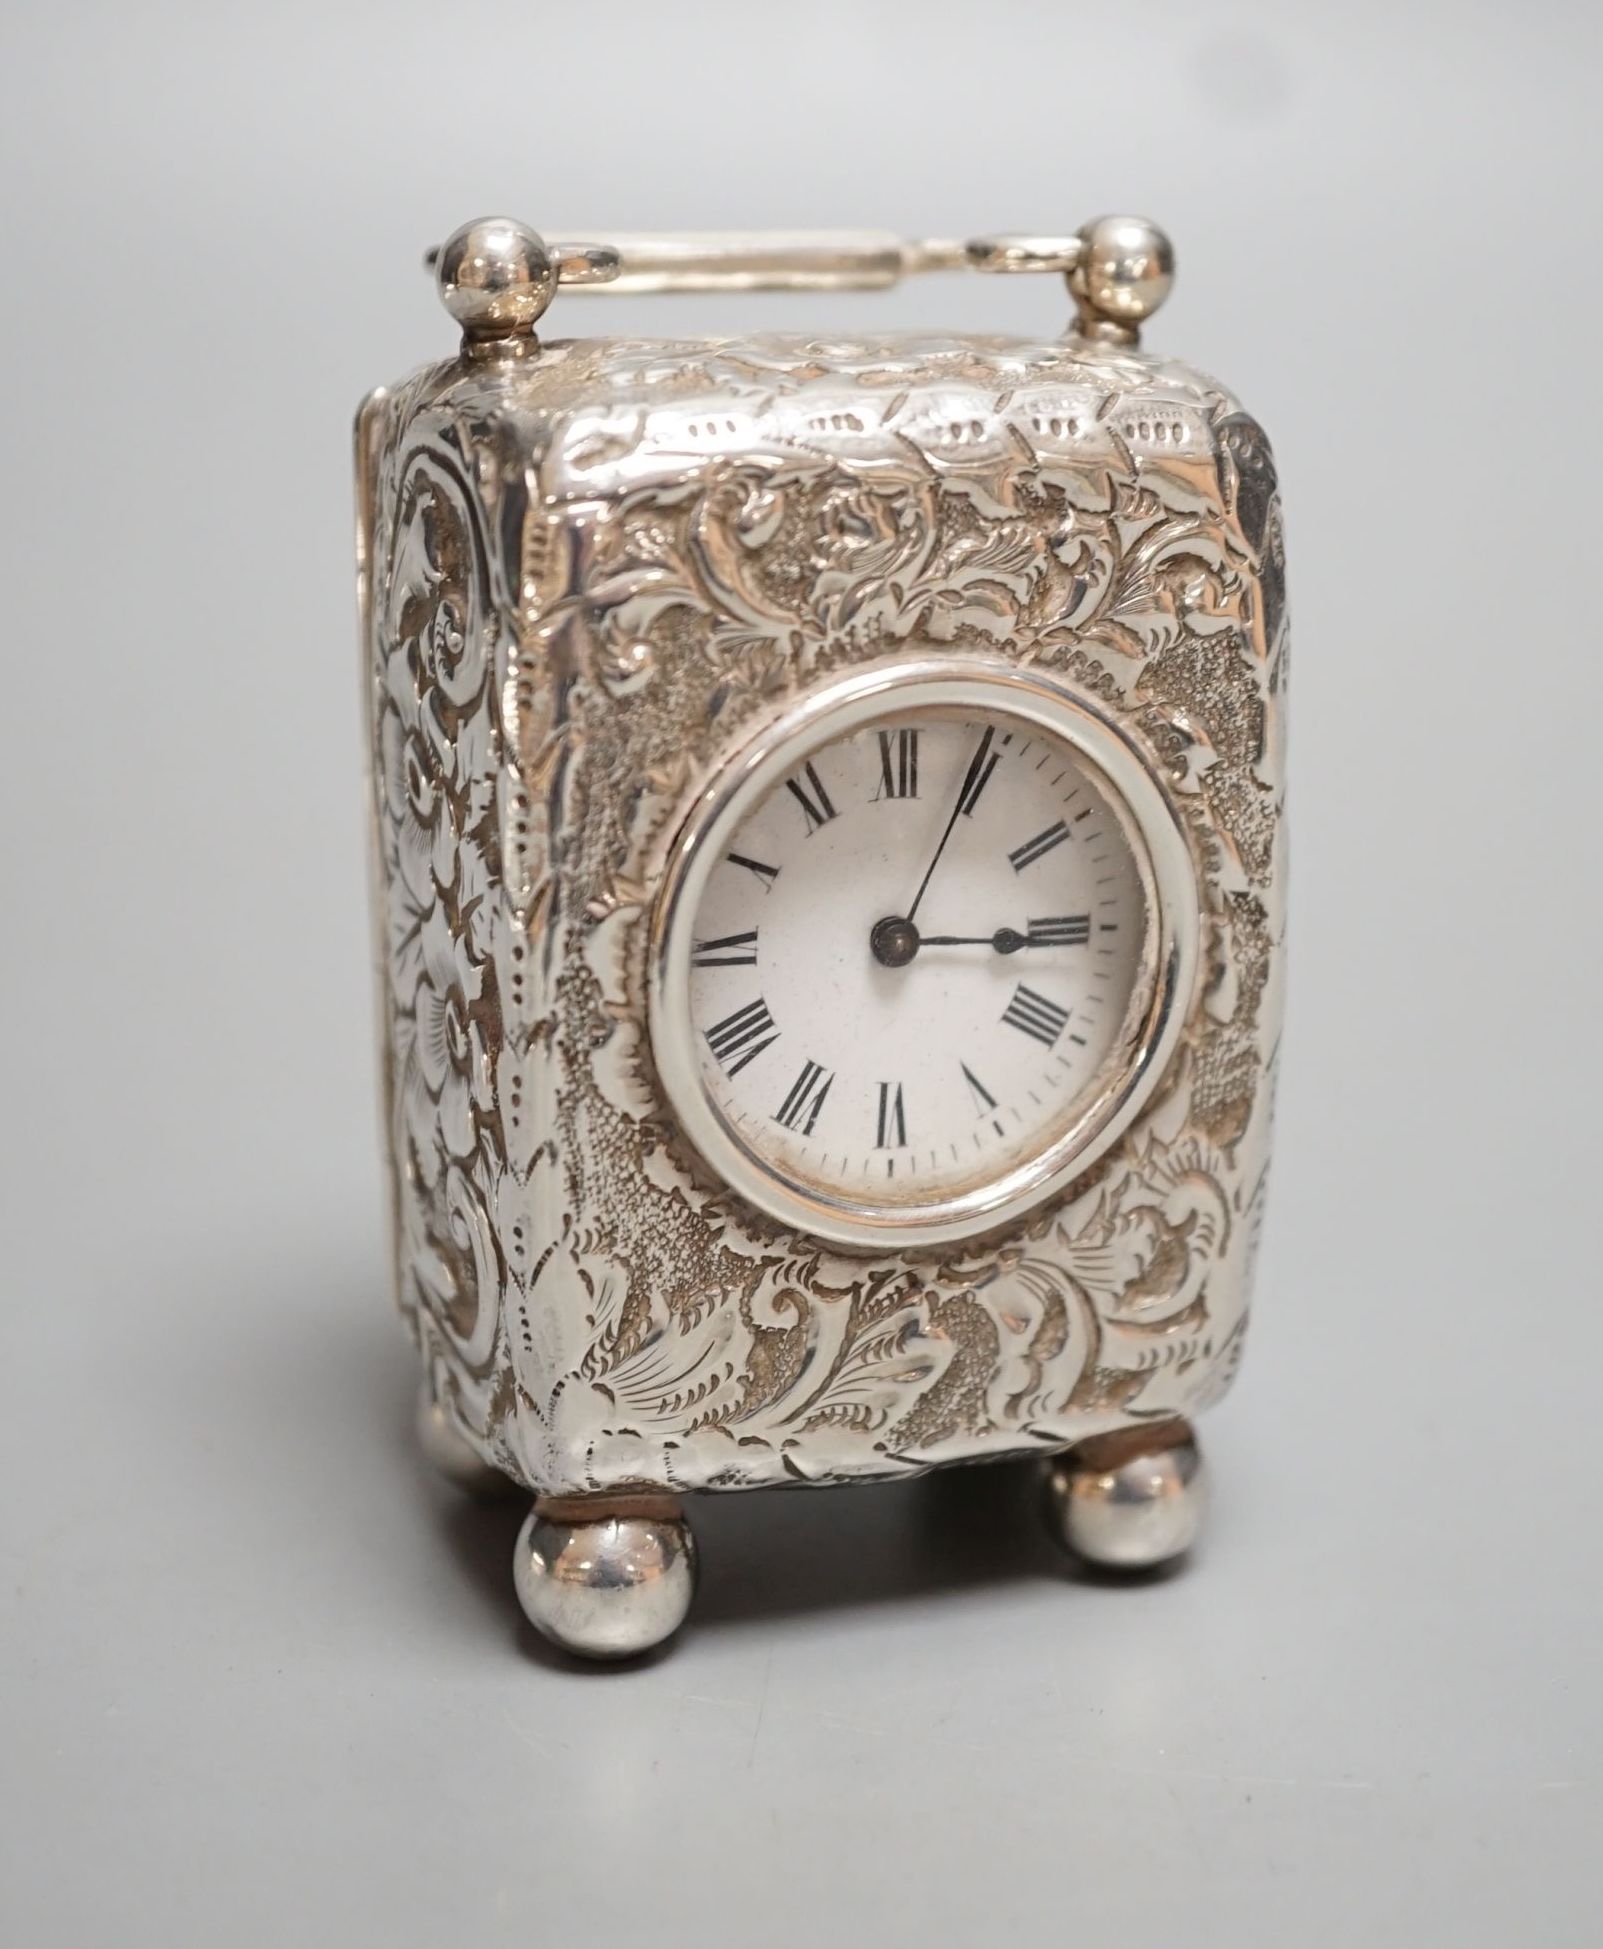 A late Victorian embossed silver cased miniature carriage timepiece, maker G.B, London, 1894, on bun feet, height 78mm.